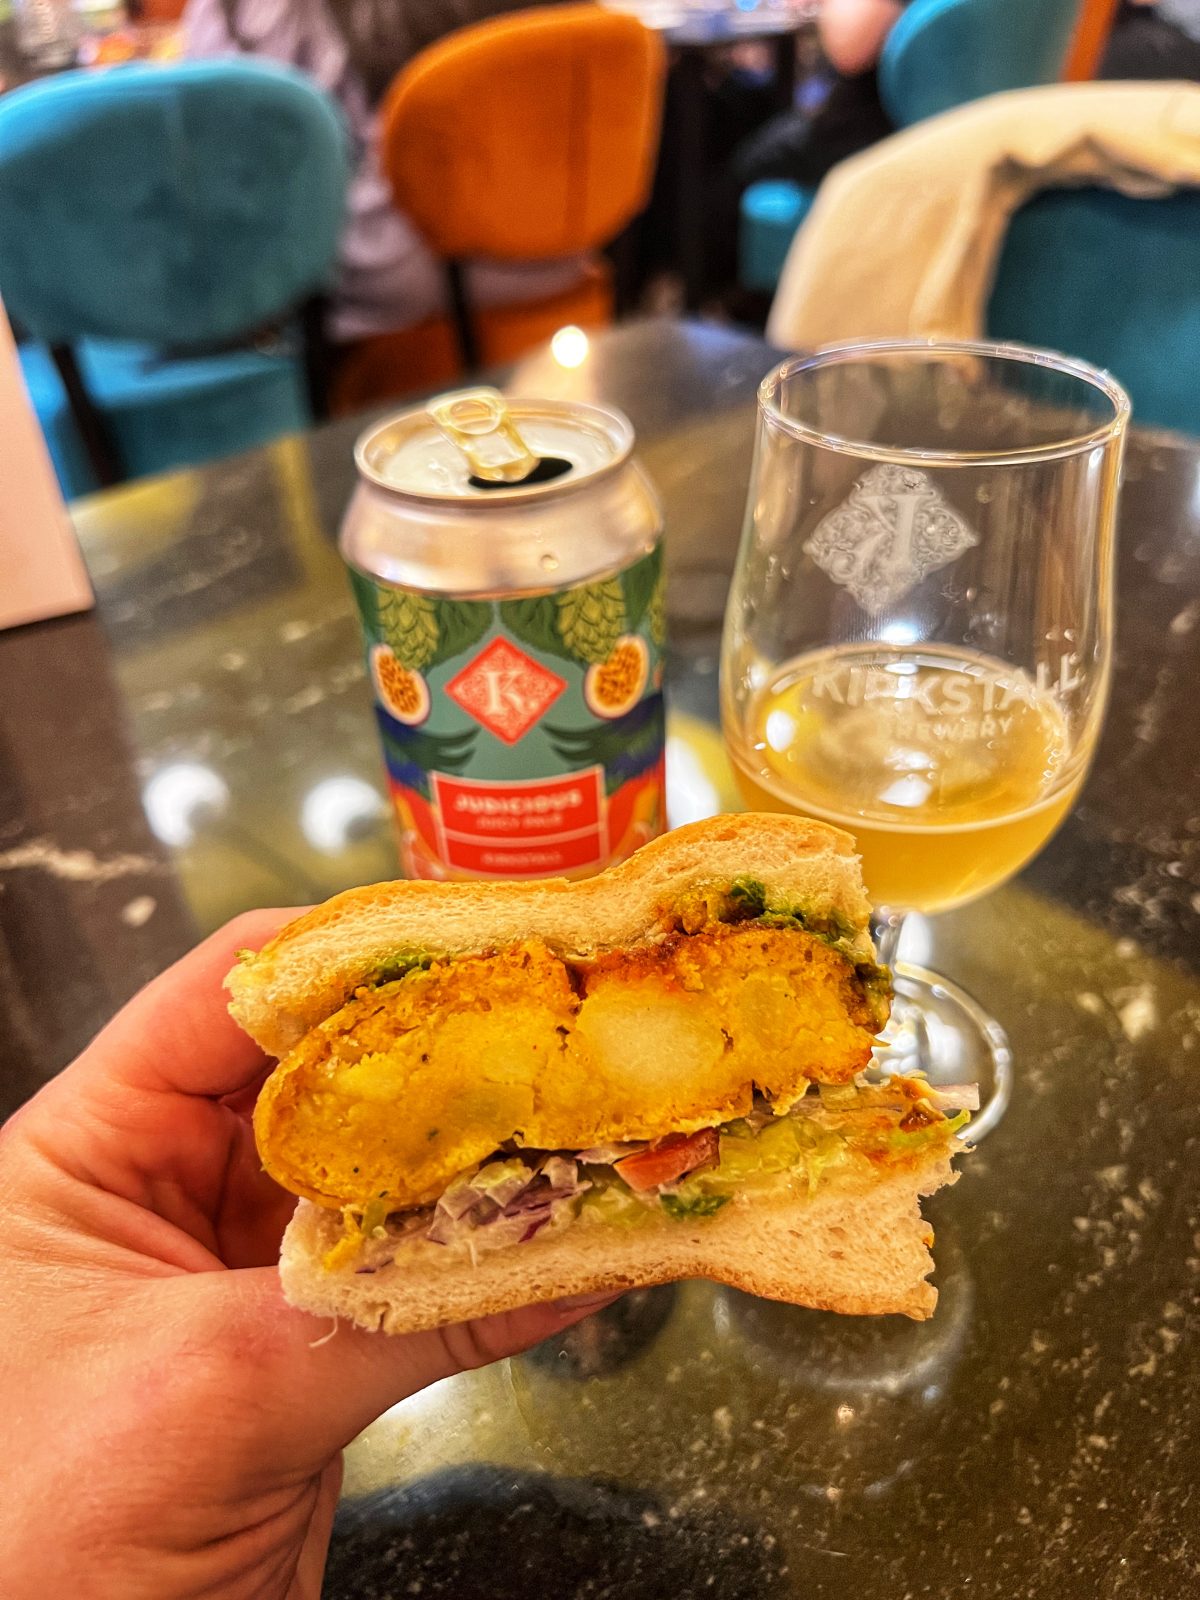 Half a sandwich cut open with beer in background.